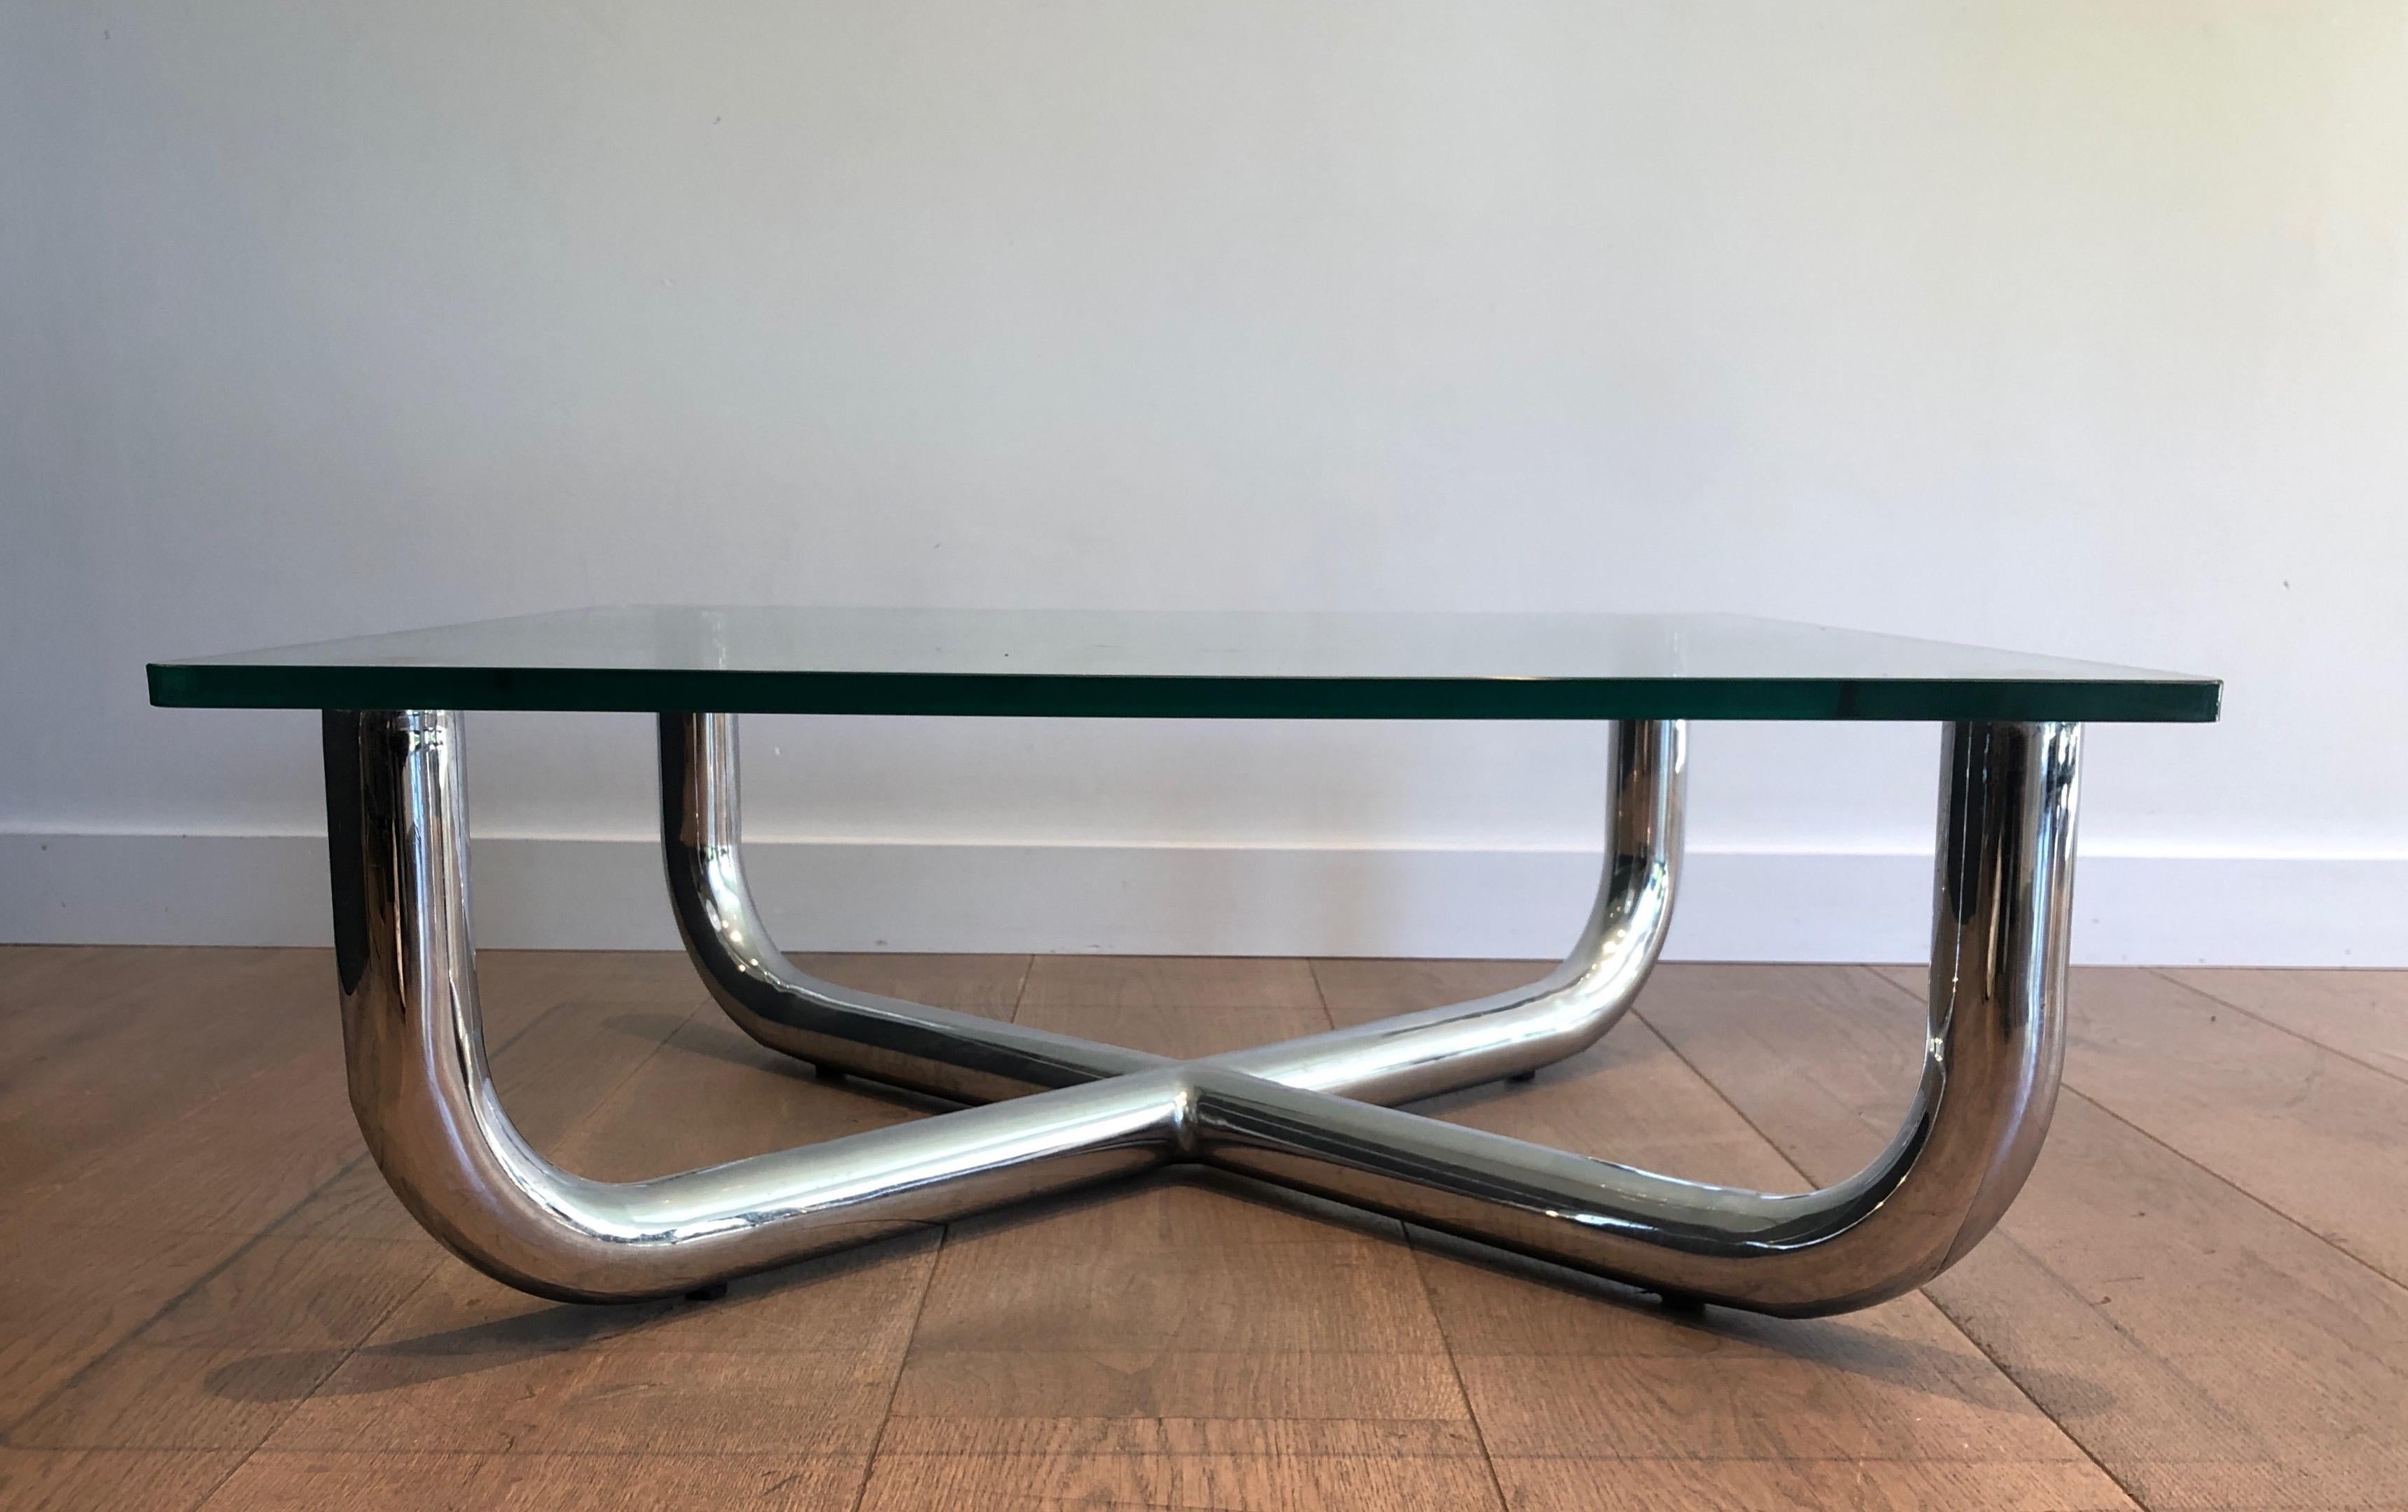 Chromed Coffee Table with Glass Shelf, French Work, Circa 1970 For Sale 1